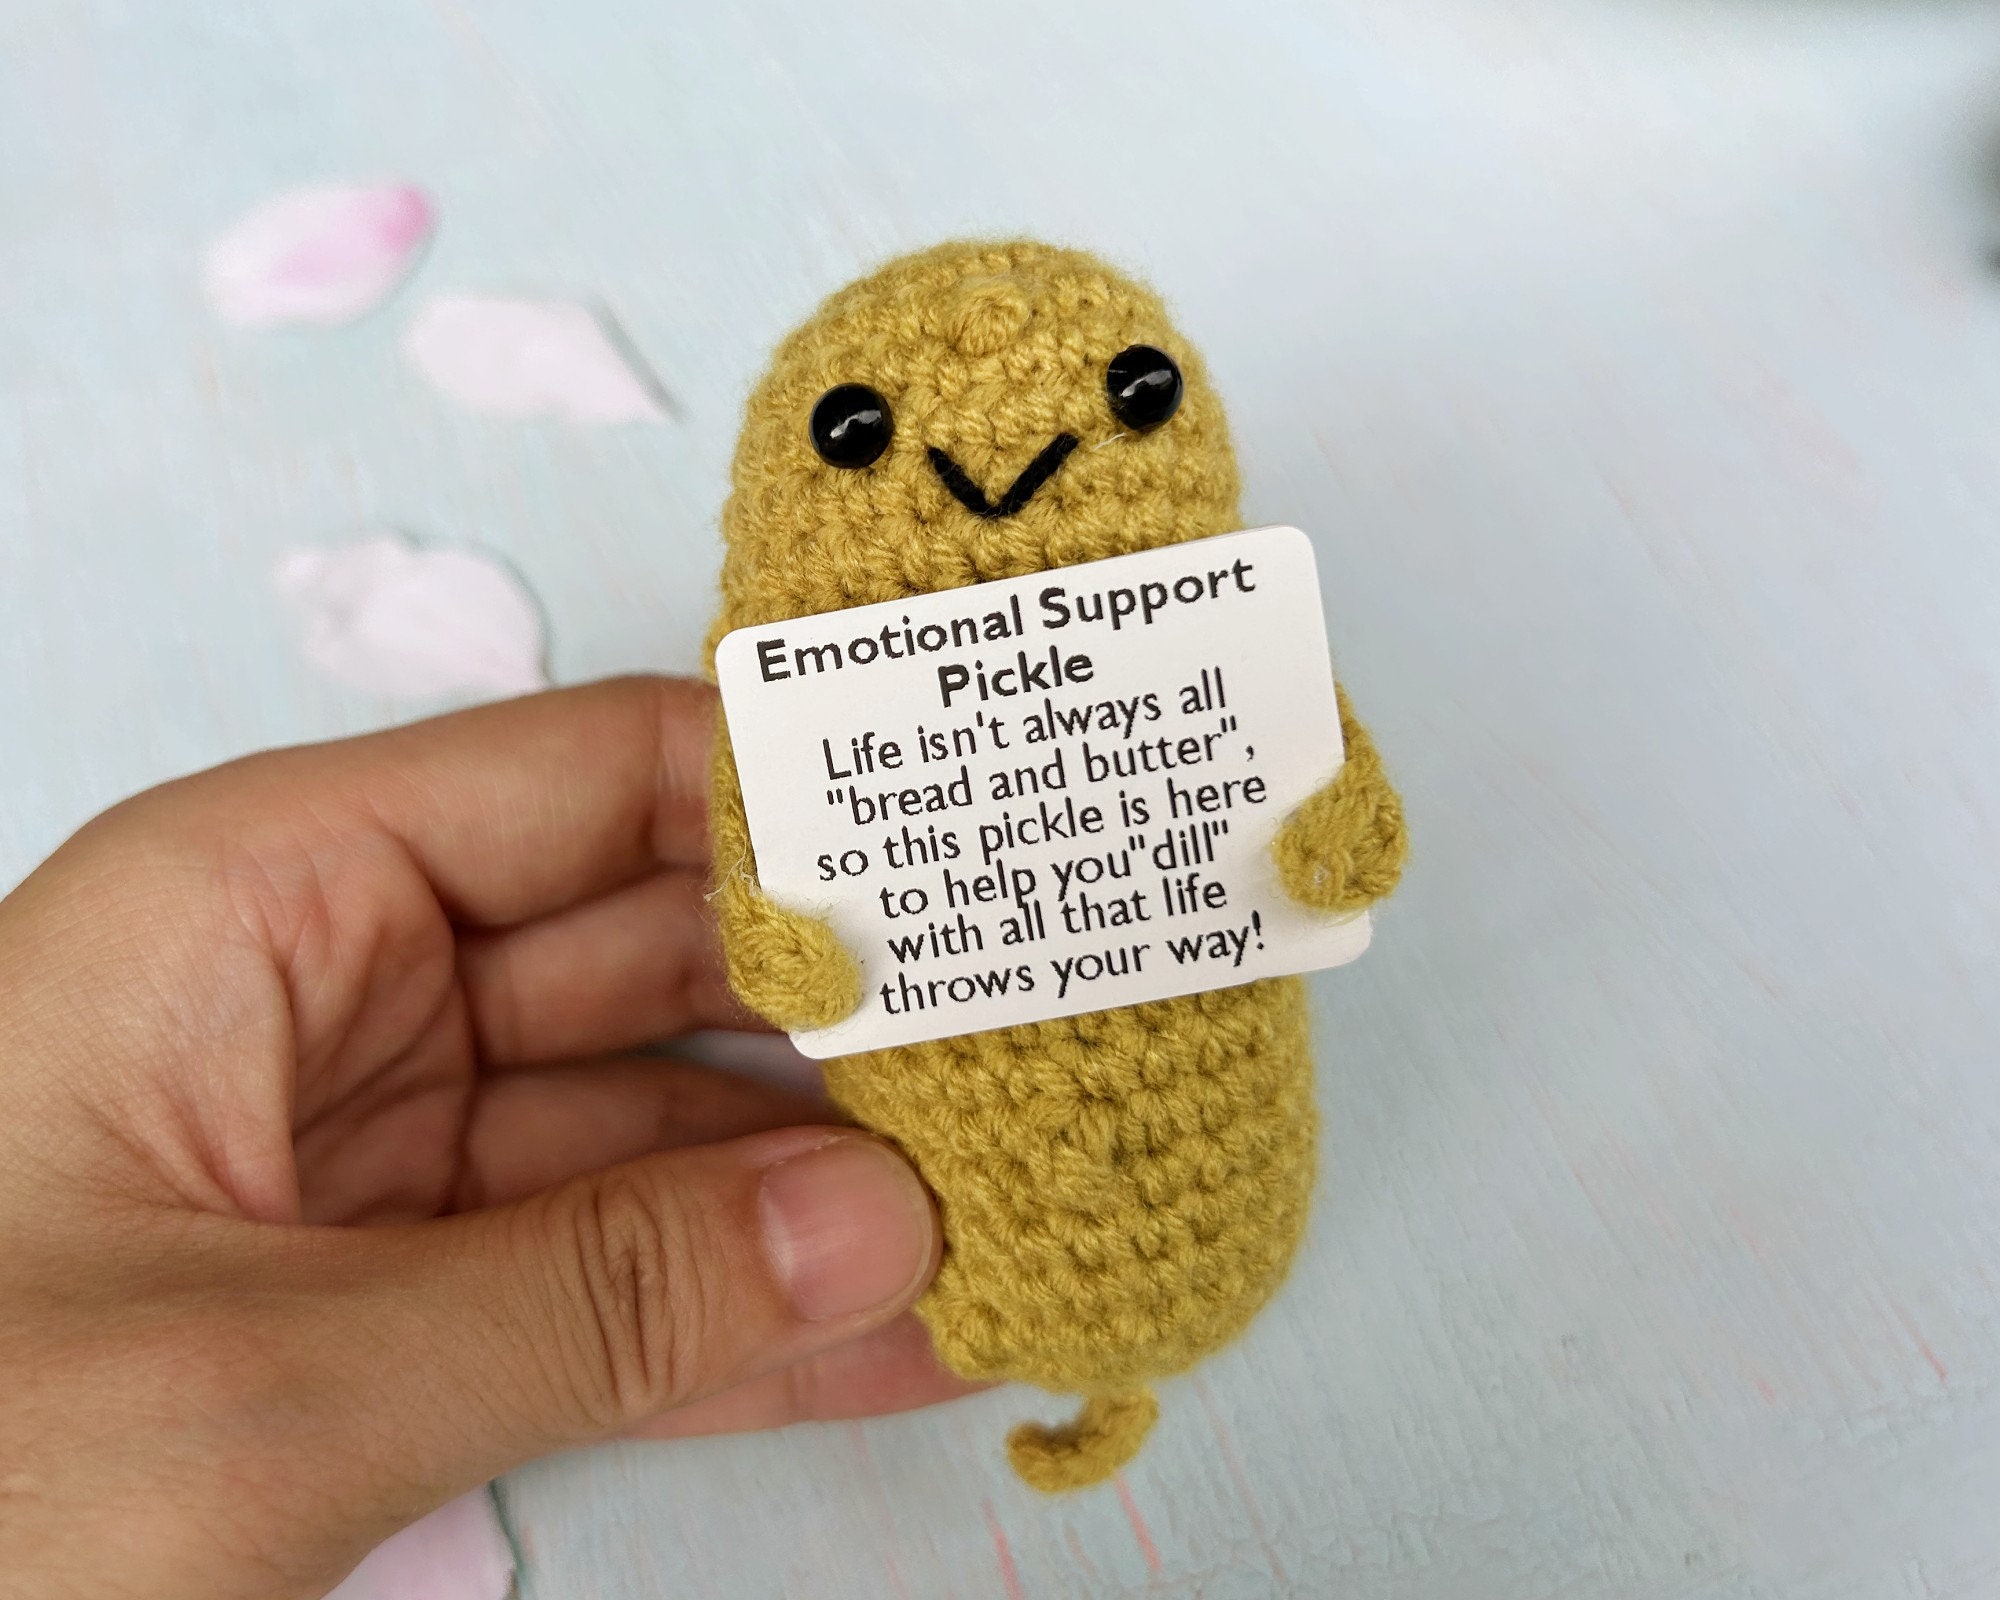 Positive Potato Emotional Support Pickle Handmade Crochet Positive  Affirmation Positiveness Mini Collectibles Home Decor Cheer up Gifts 